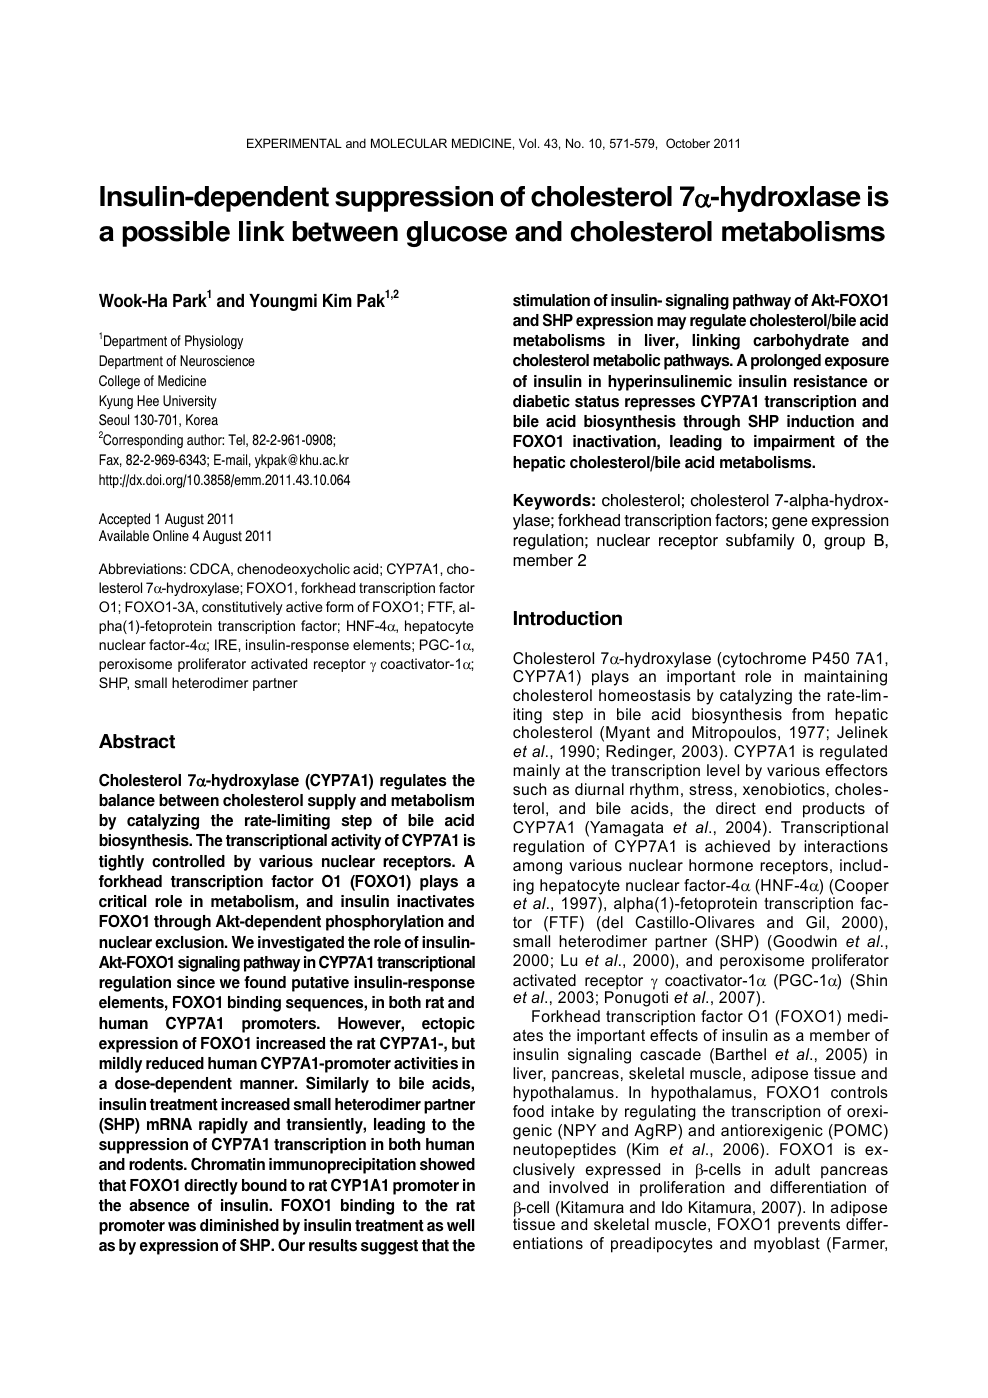 Insulin Dependent Suppression Of Cholesterol 7a Hydroxlase Is A Possible Link Between Glucose And Cholesterol Metabolisms Topic Of Research Paper In Biological Sciences Download Scholarly Article Pdf And Read For Free On Cyberleninka